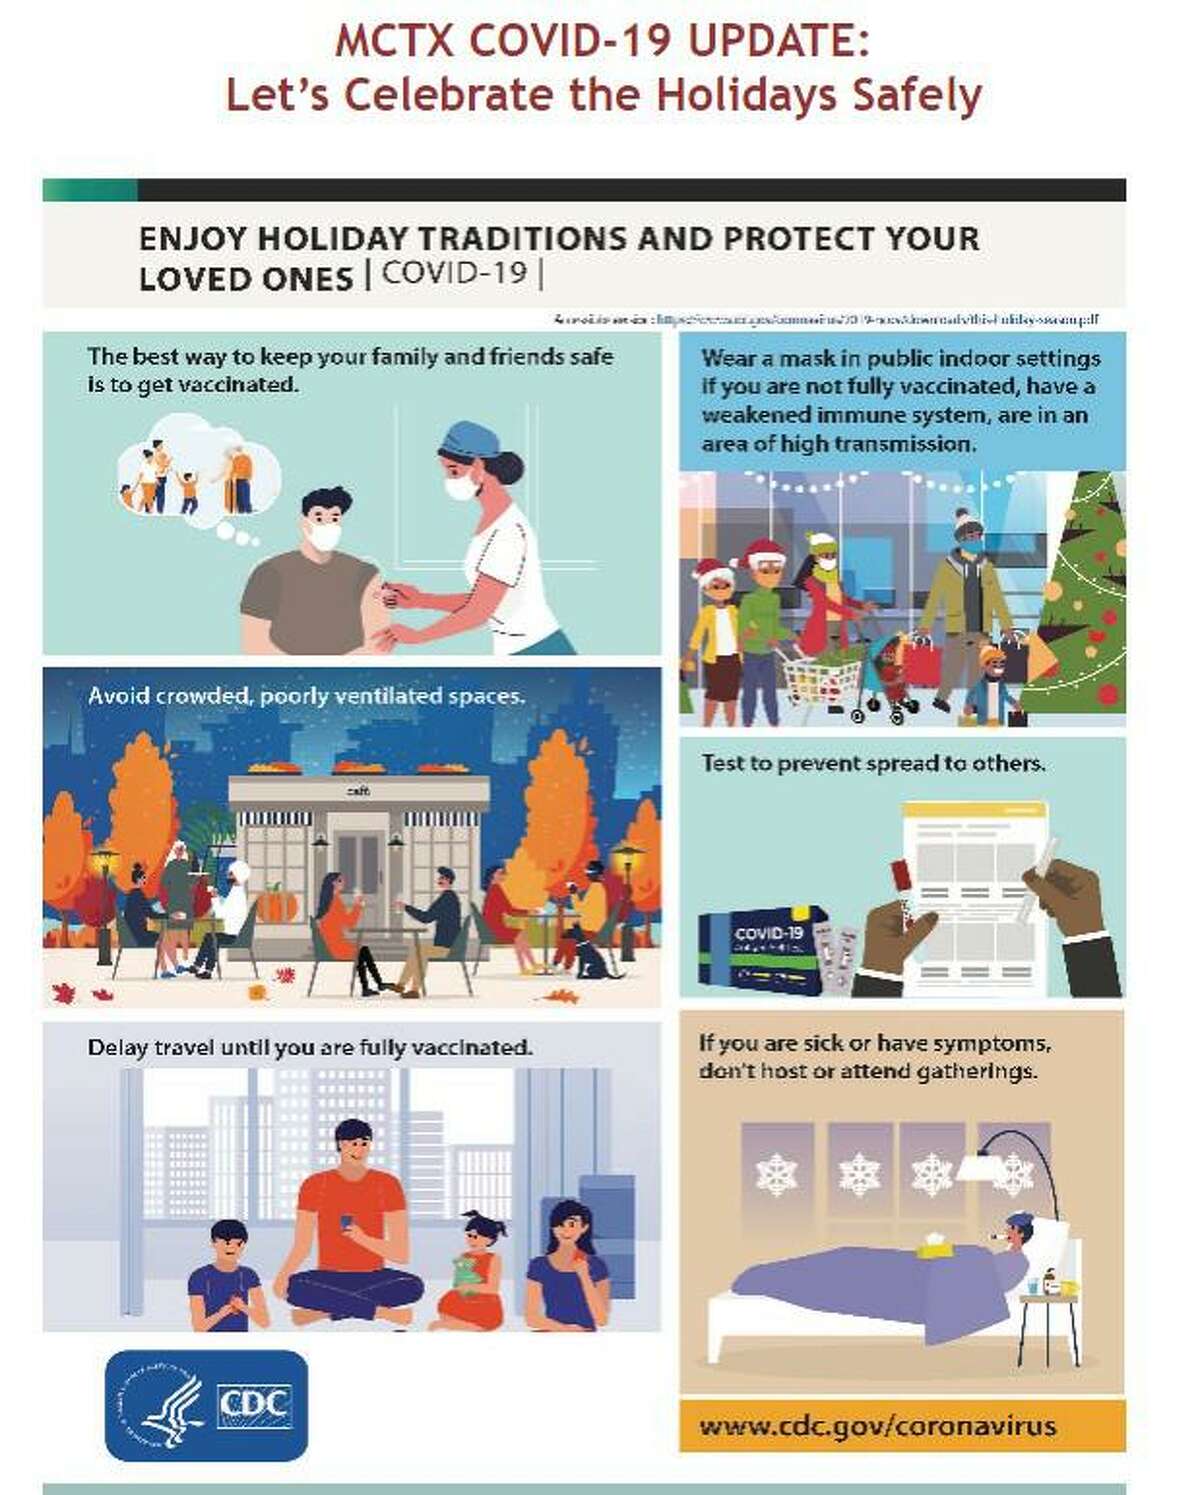 Missouri City advises residents to practice COVID-19 safety protocols during holiday season.